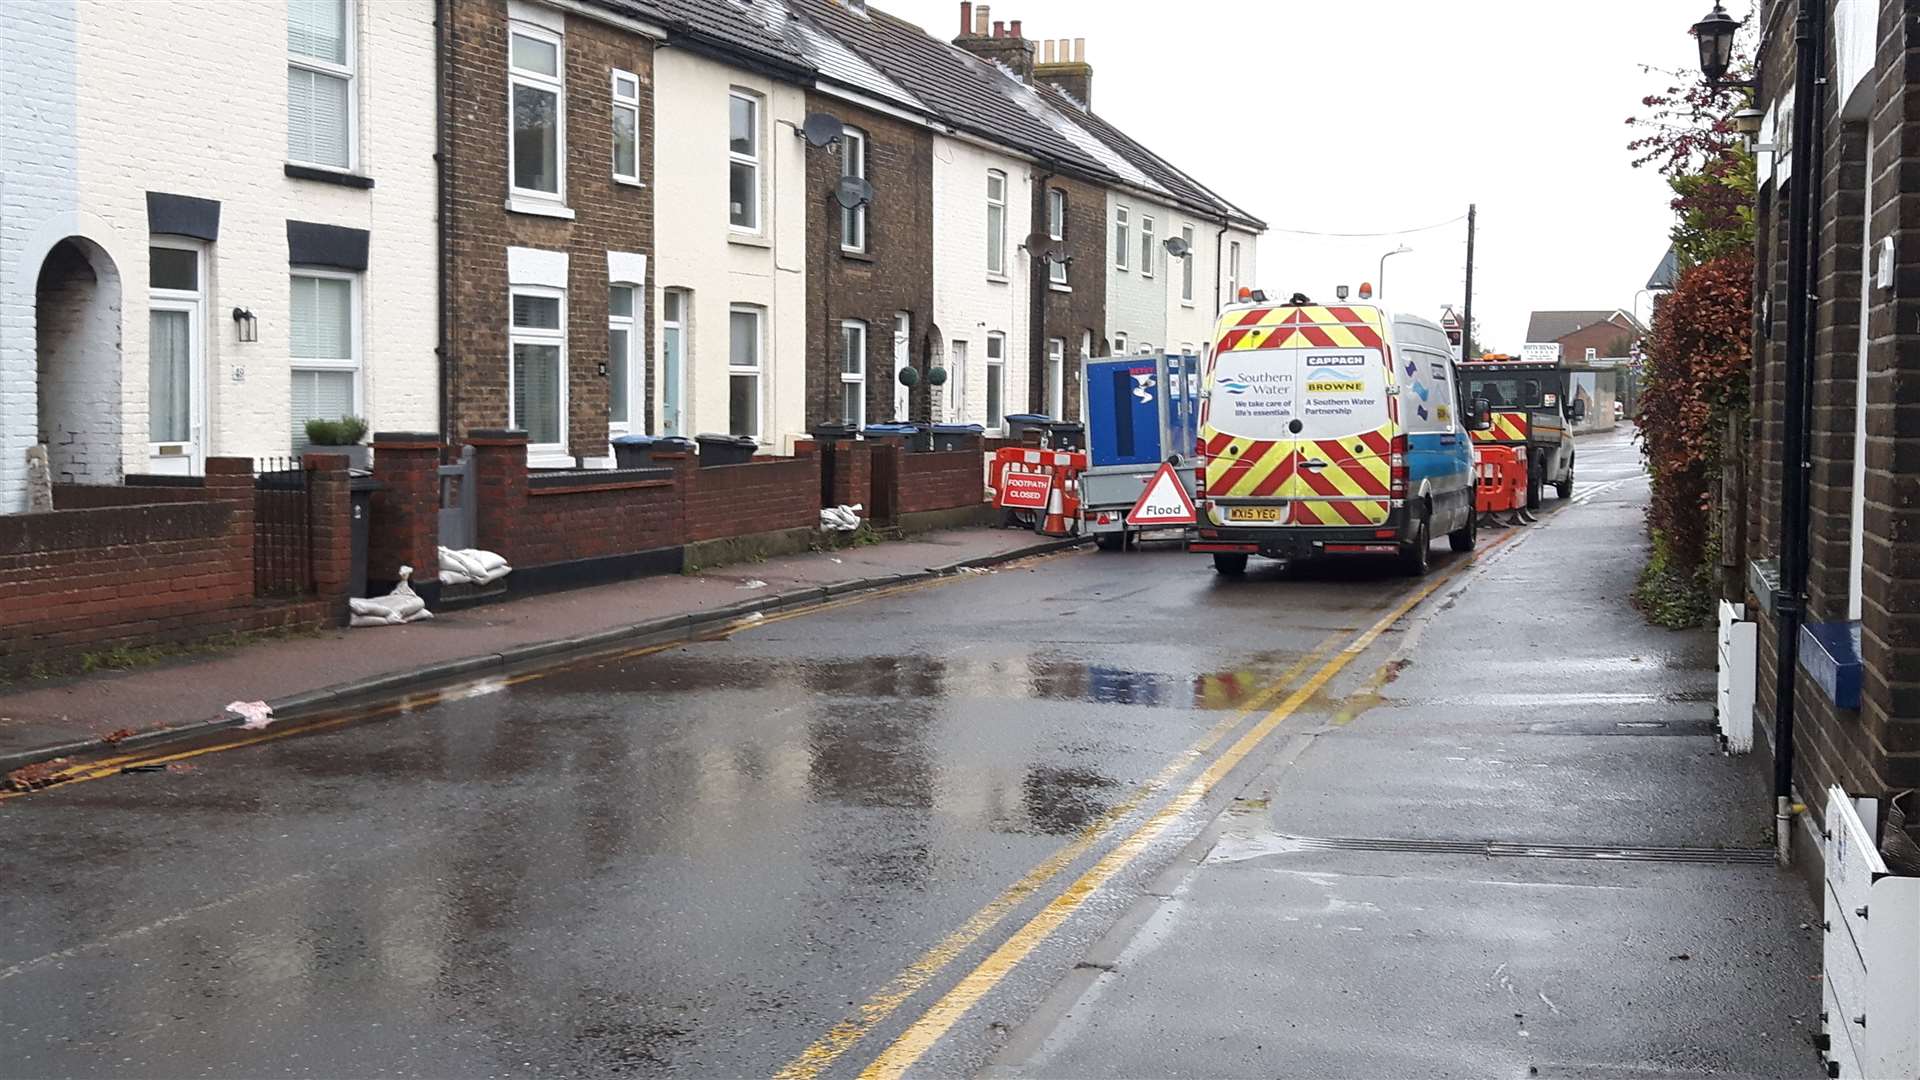 Albert Road was closed due to flooding fears in 2018